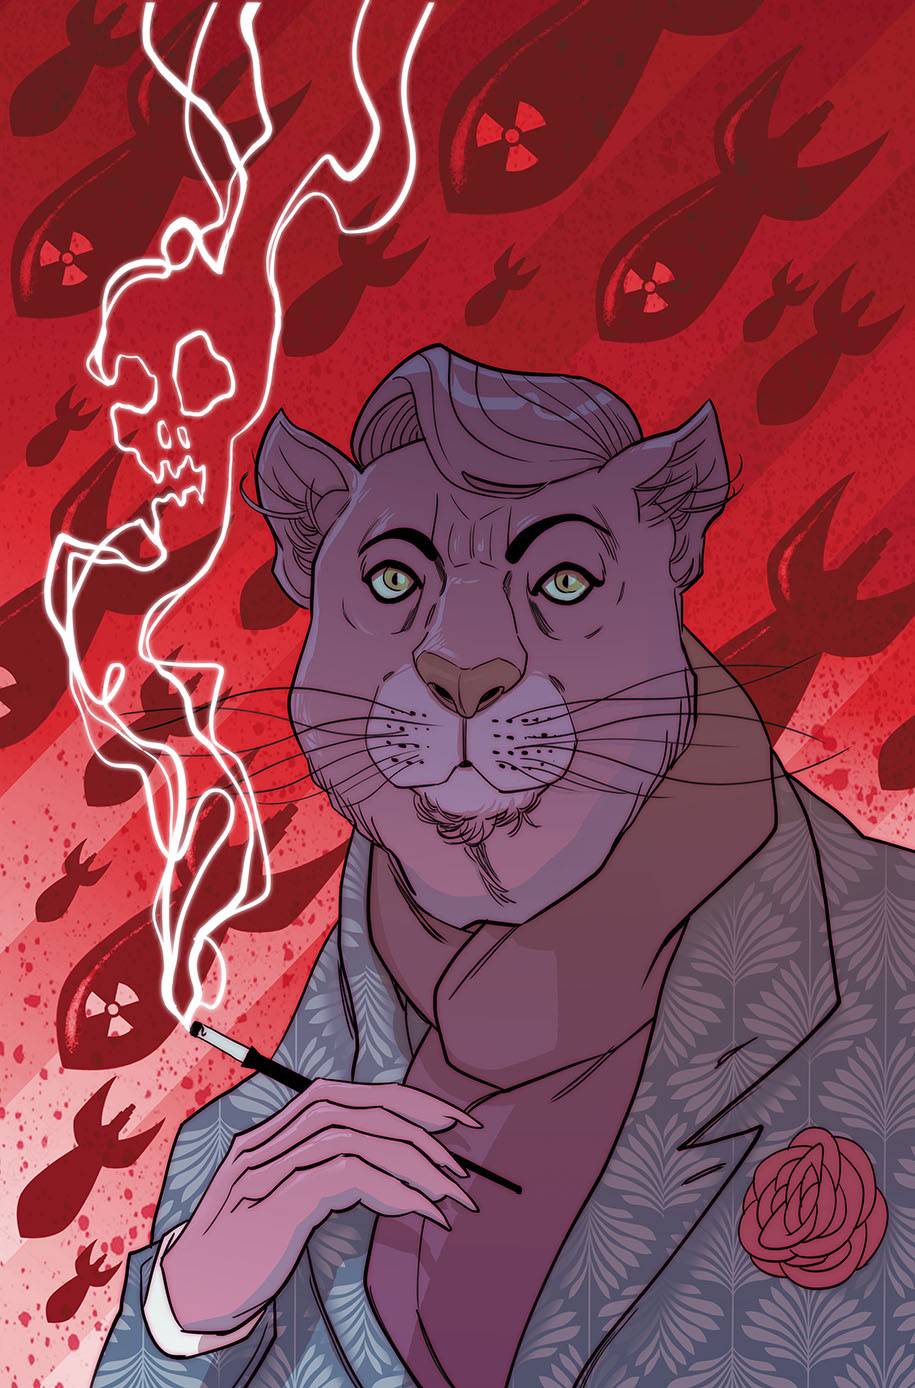 Exit Stage Left The Snagglepuss Chronicles #4 Variant Edition (Of 6)